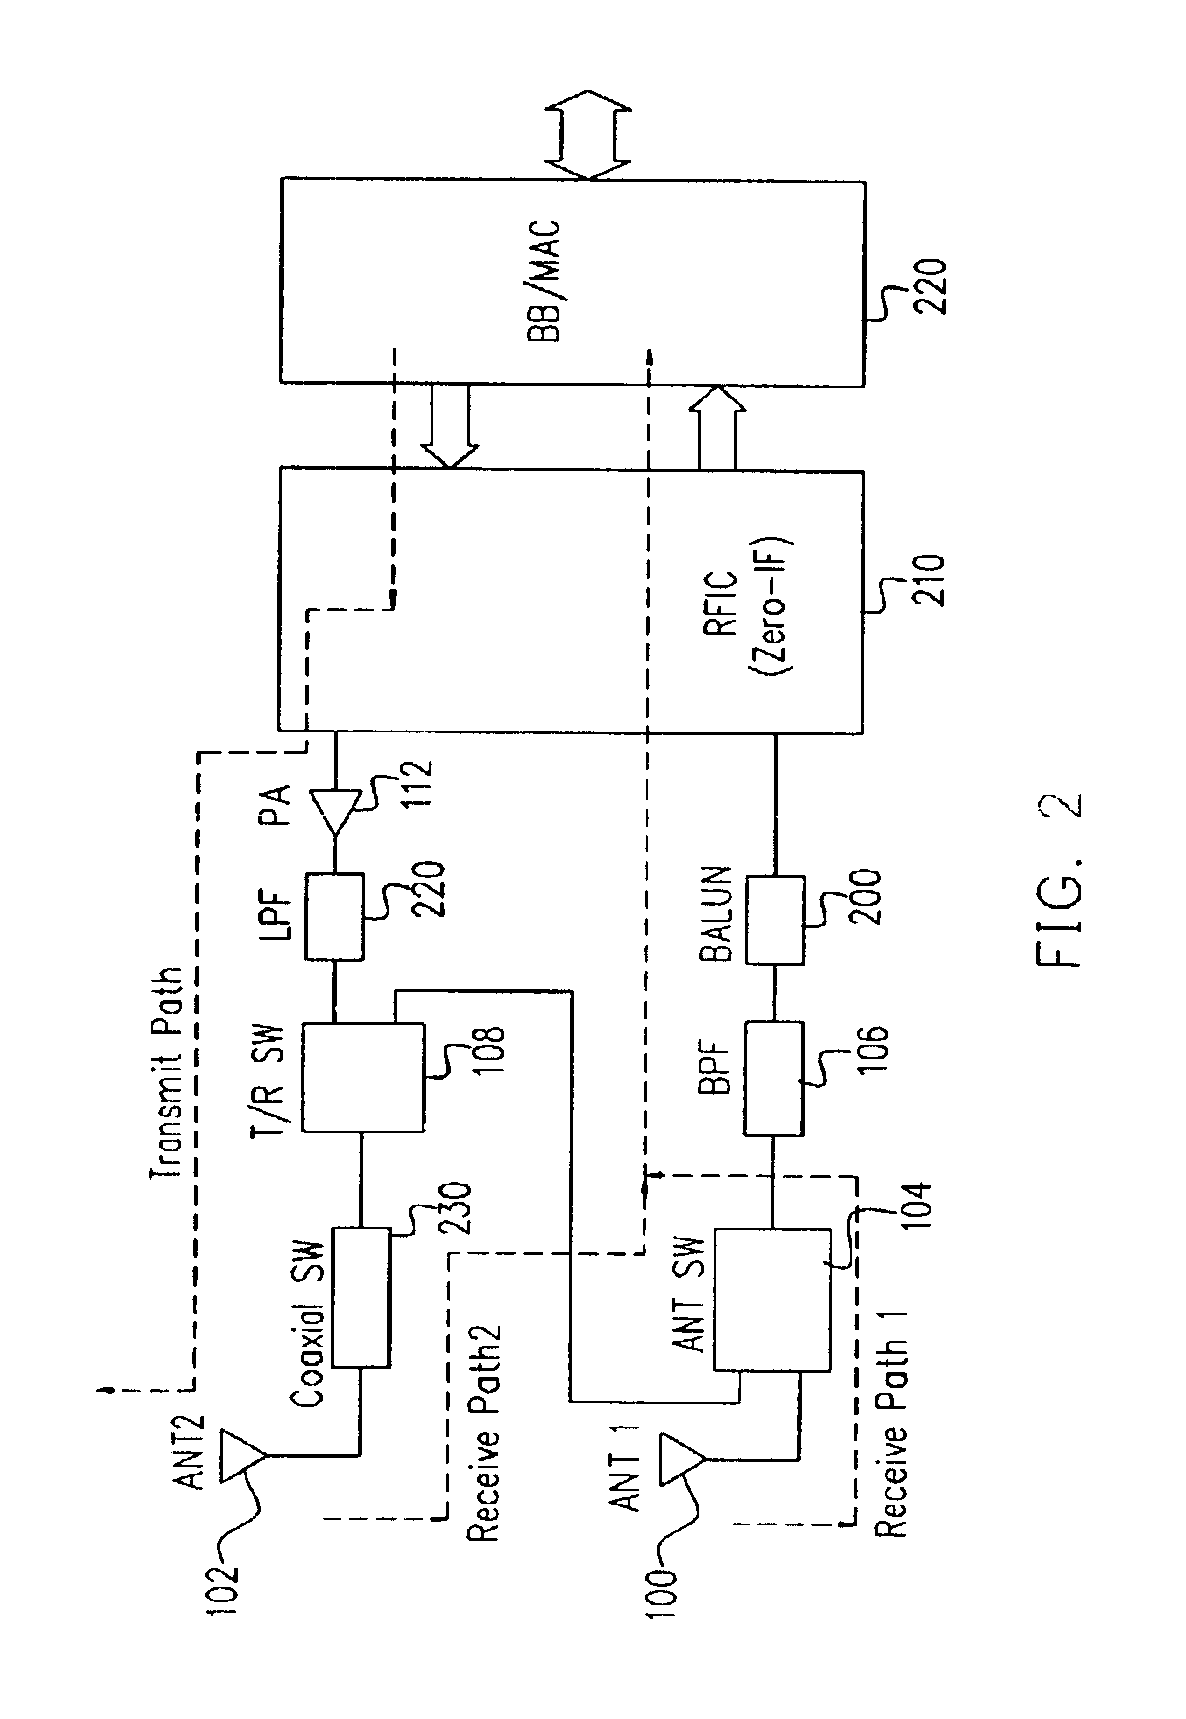 Layout of wireless communication circuit on a printed circuit board